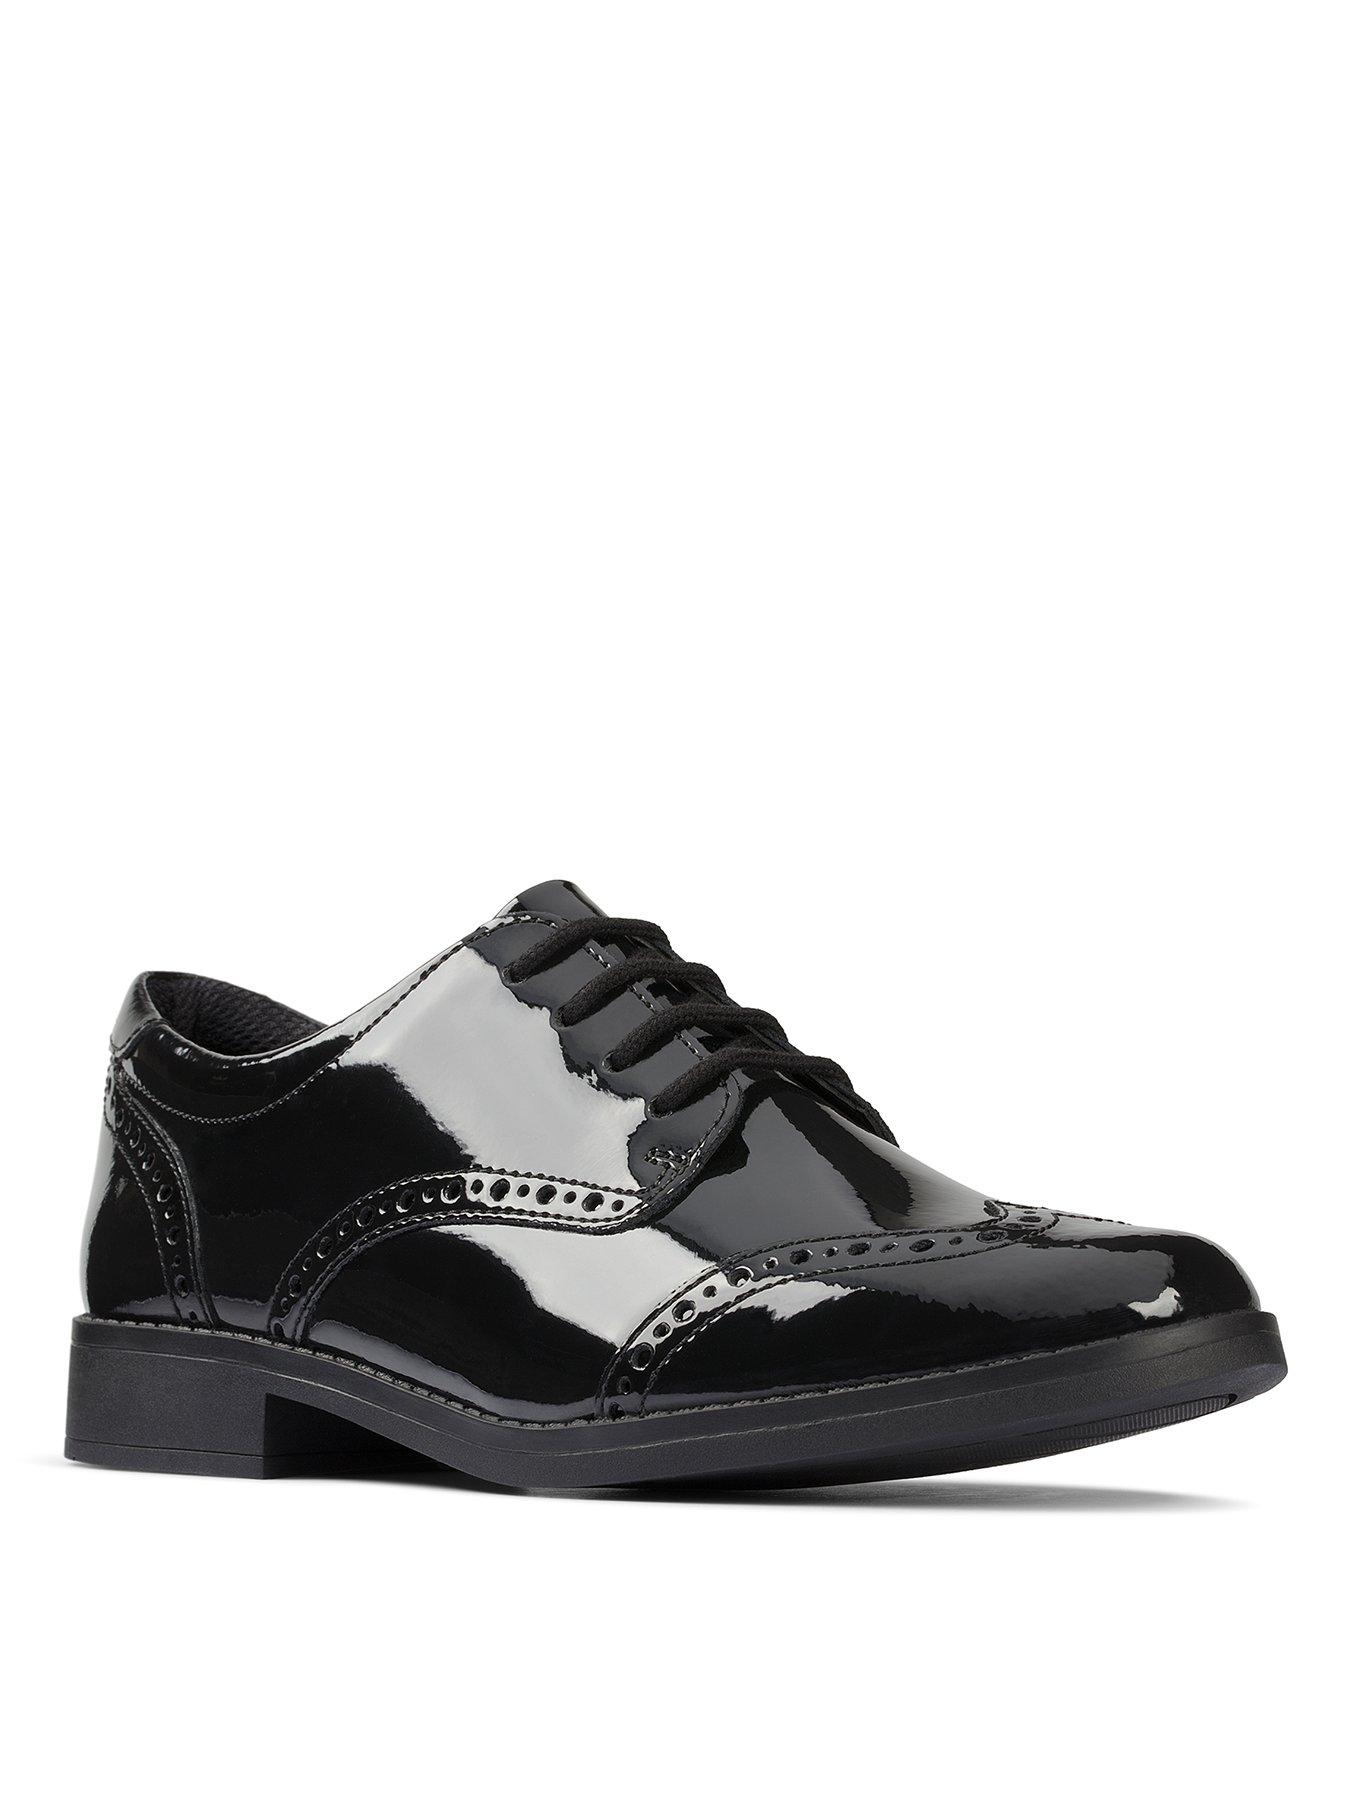 Shoes & boots Youth Aubrie Craft Patent Brogue - Black Patent